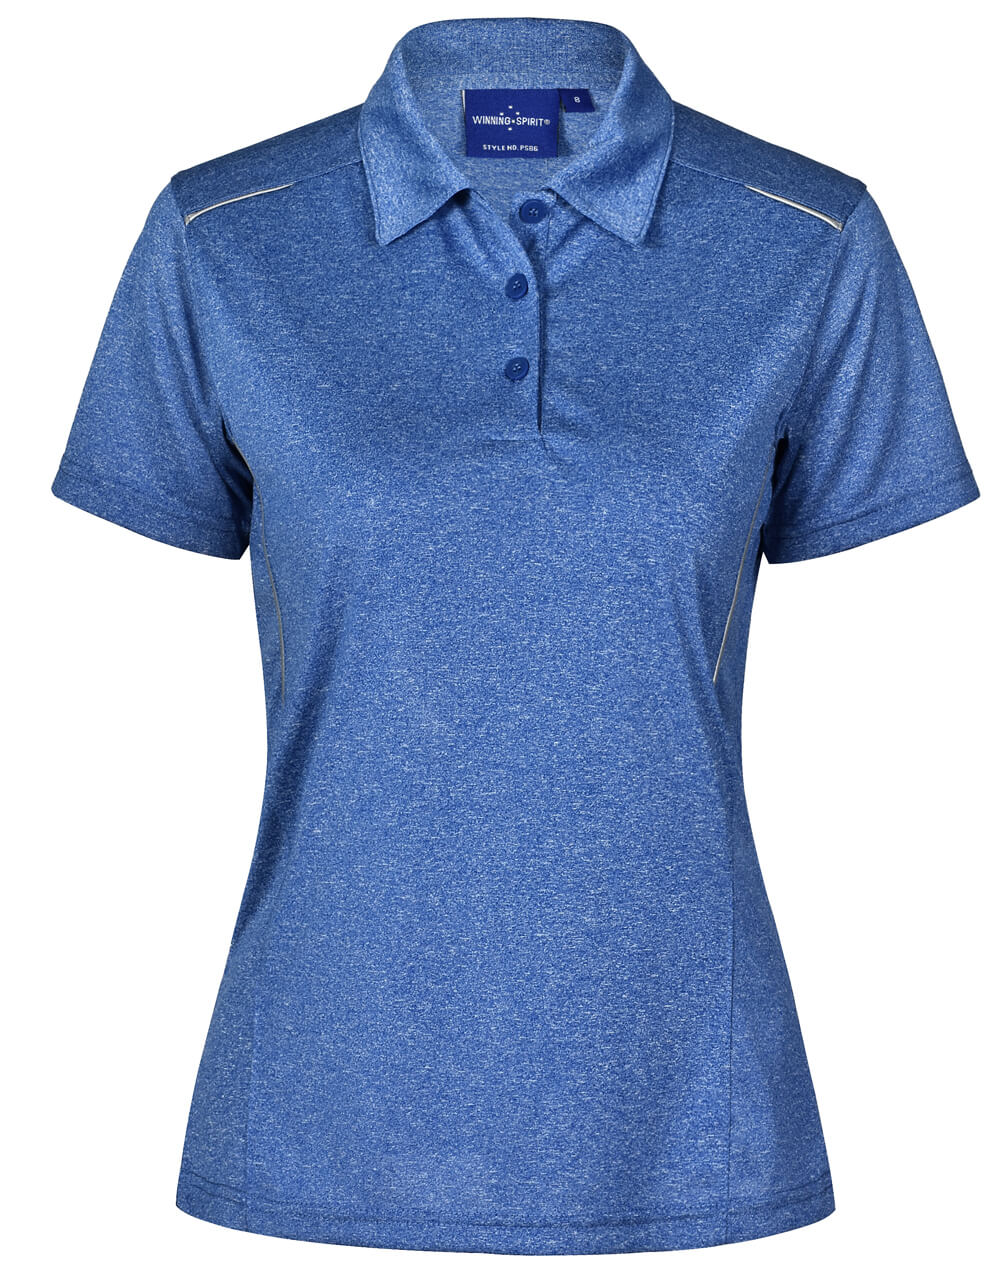 PS86 Harland Polo Ladies